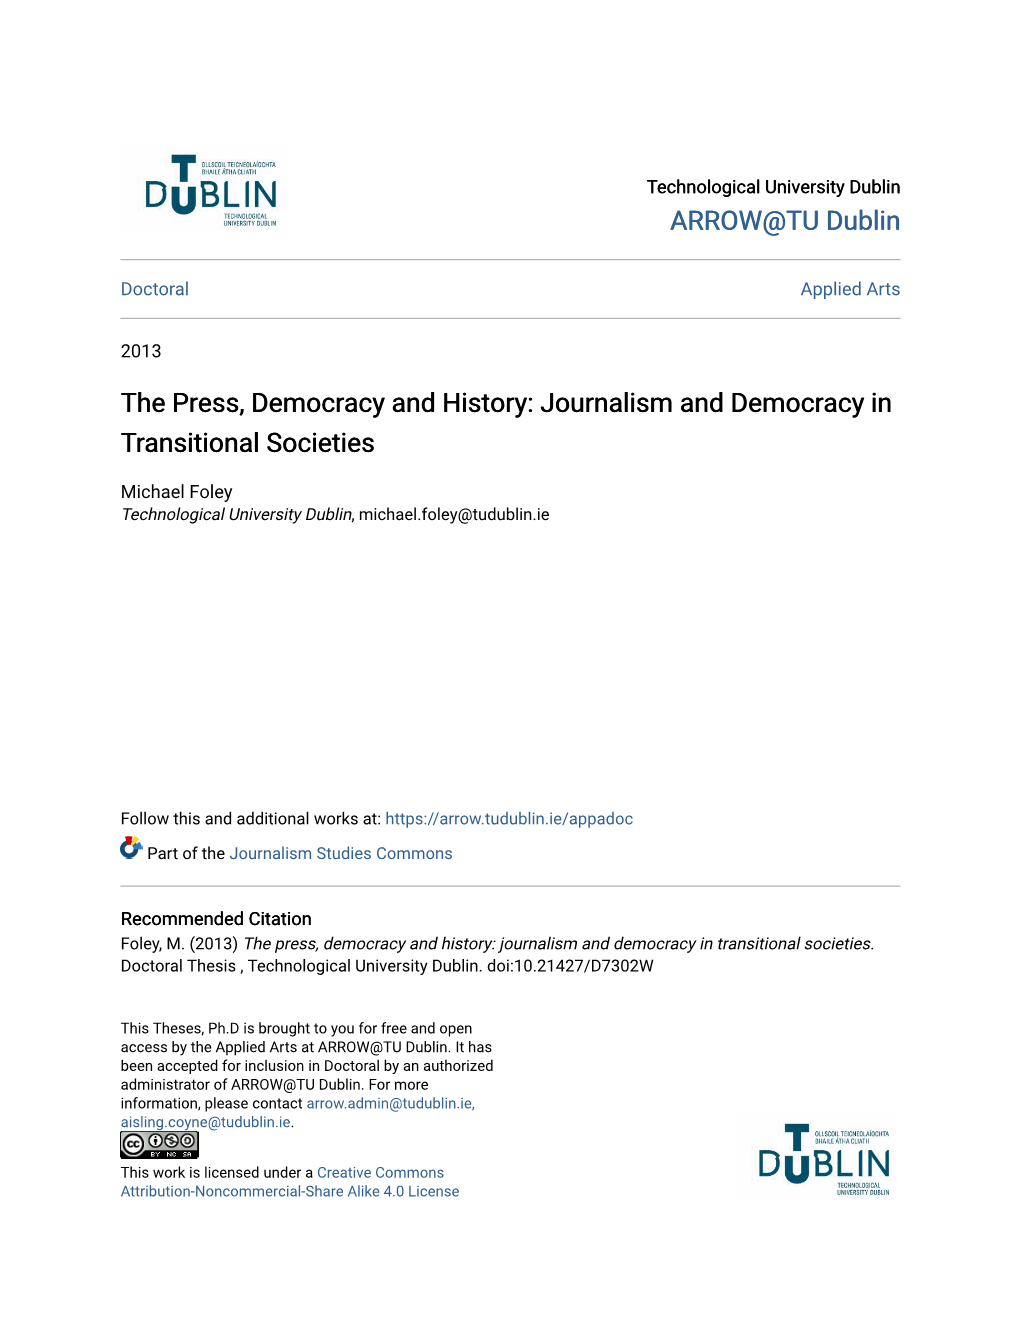 Journalism and Democracy in Transitional Societies